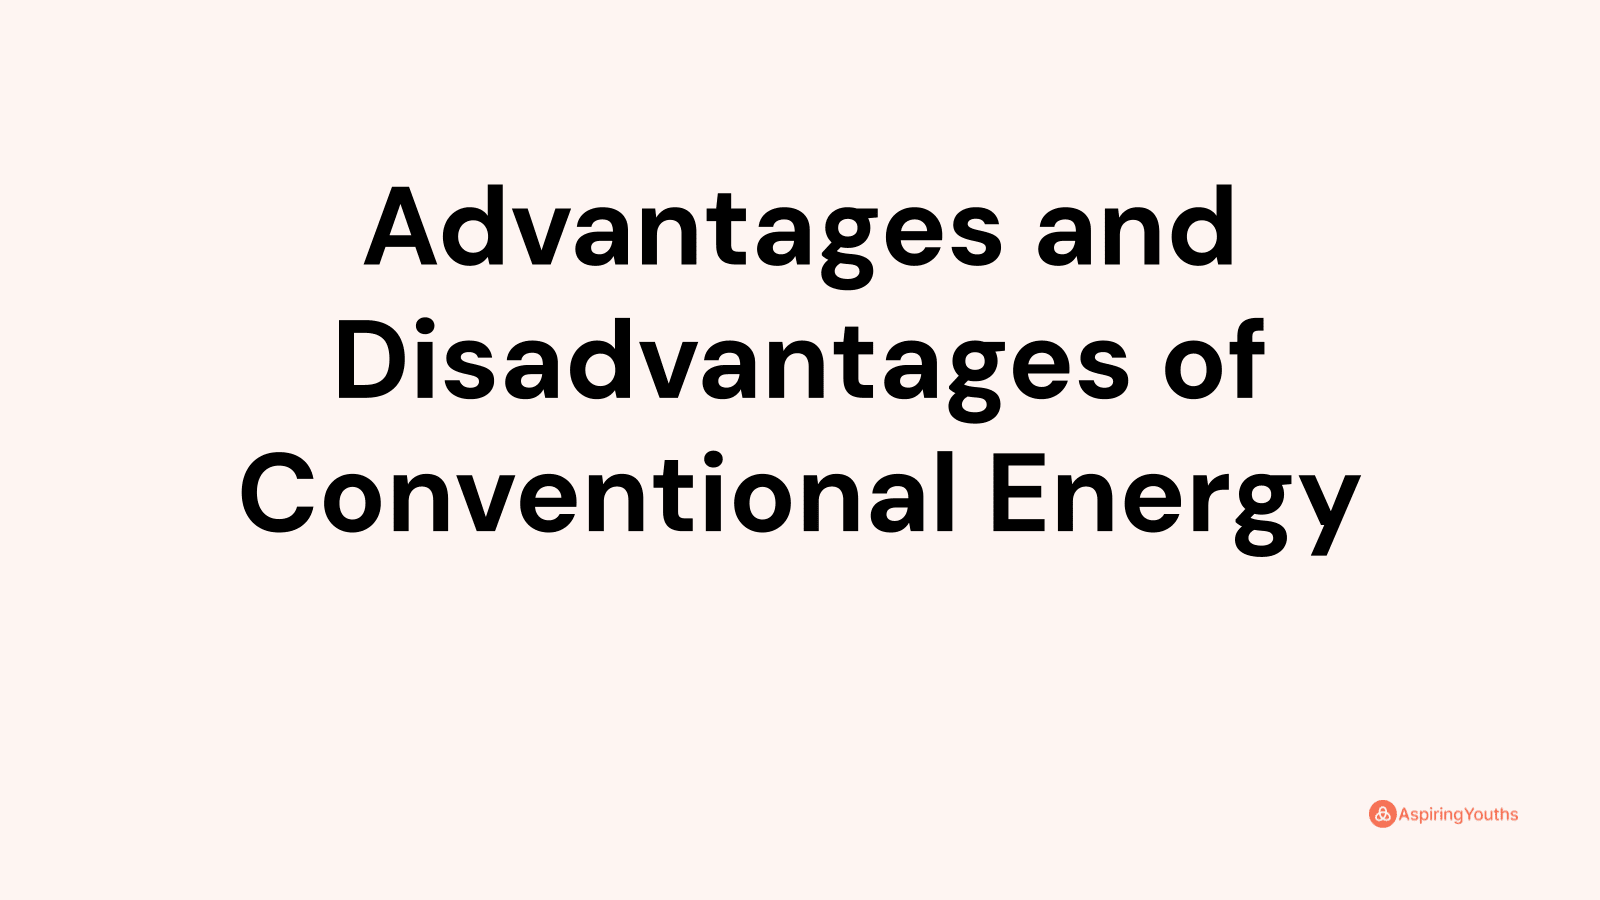 Advantages and disadvantages of Conventional Energy